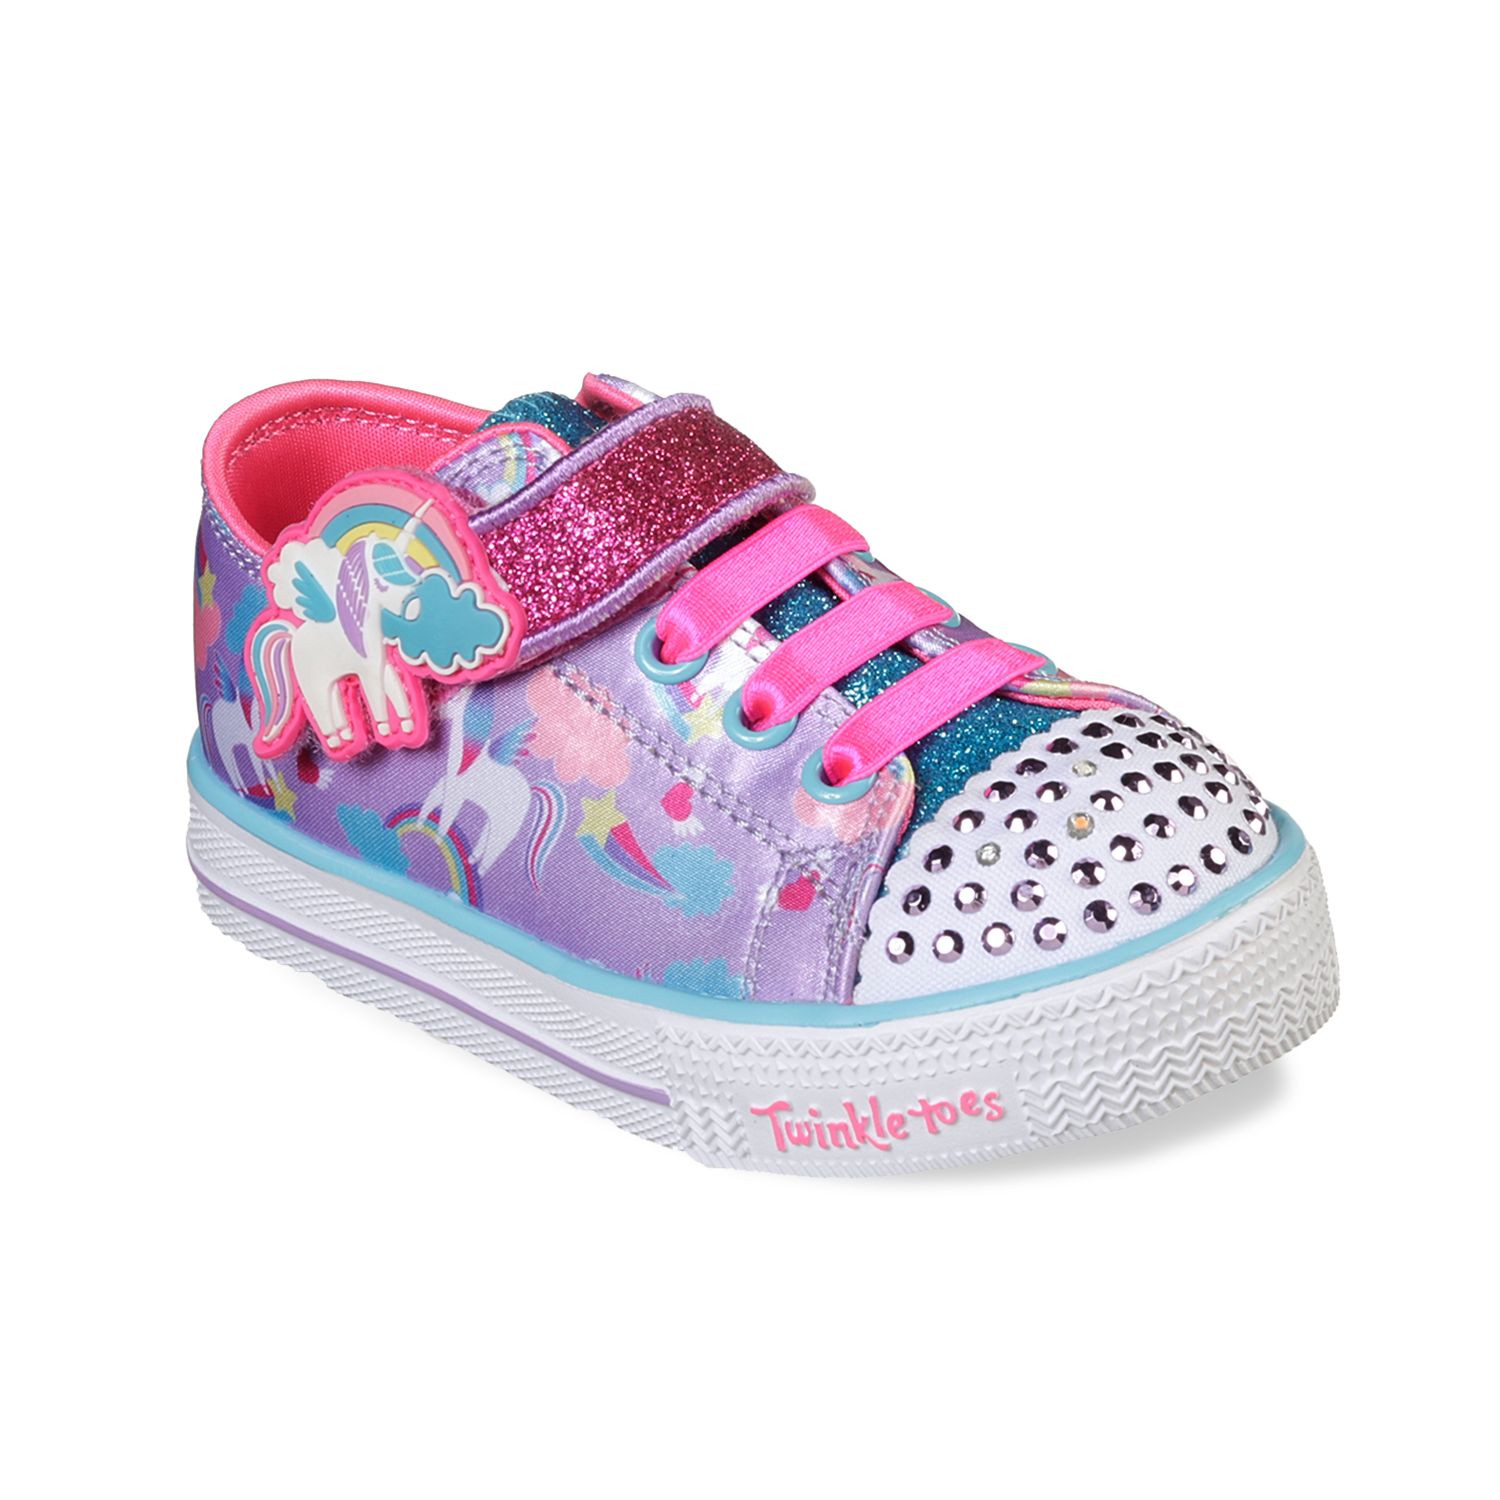 twinkle toes toddler size 7